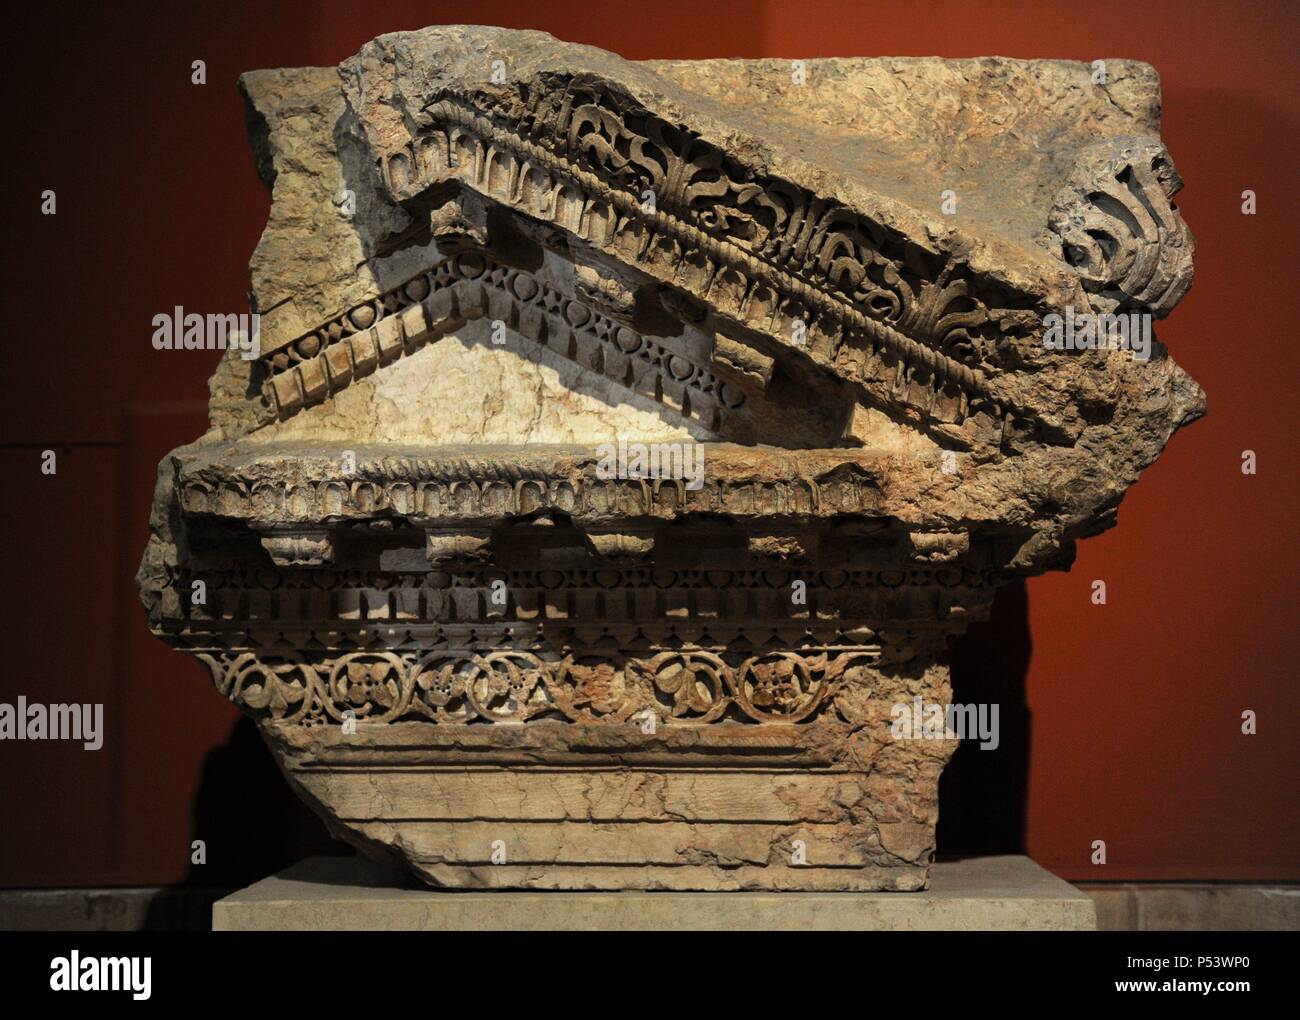 Top part of an aedicula from a wall structure from the Sanctuary of Jupiter Heliopolitanus.  Baalbek, Lebanon. Limestone. 2nd century AD. Pergamon Museum. Berlin. Germnany. Stock Photo